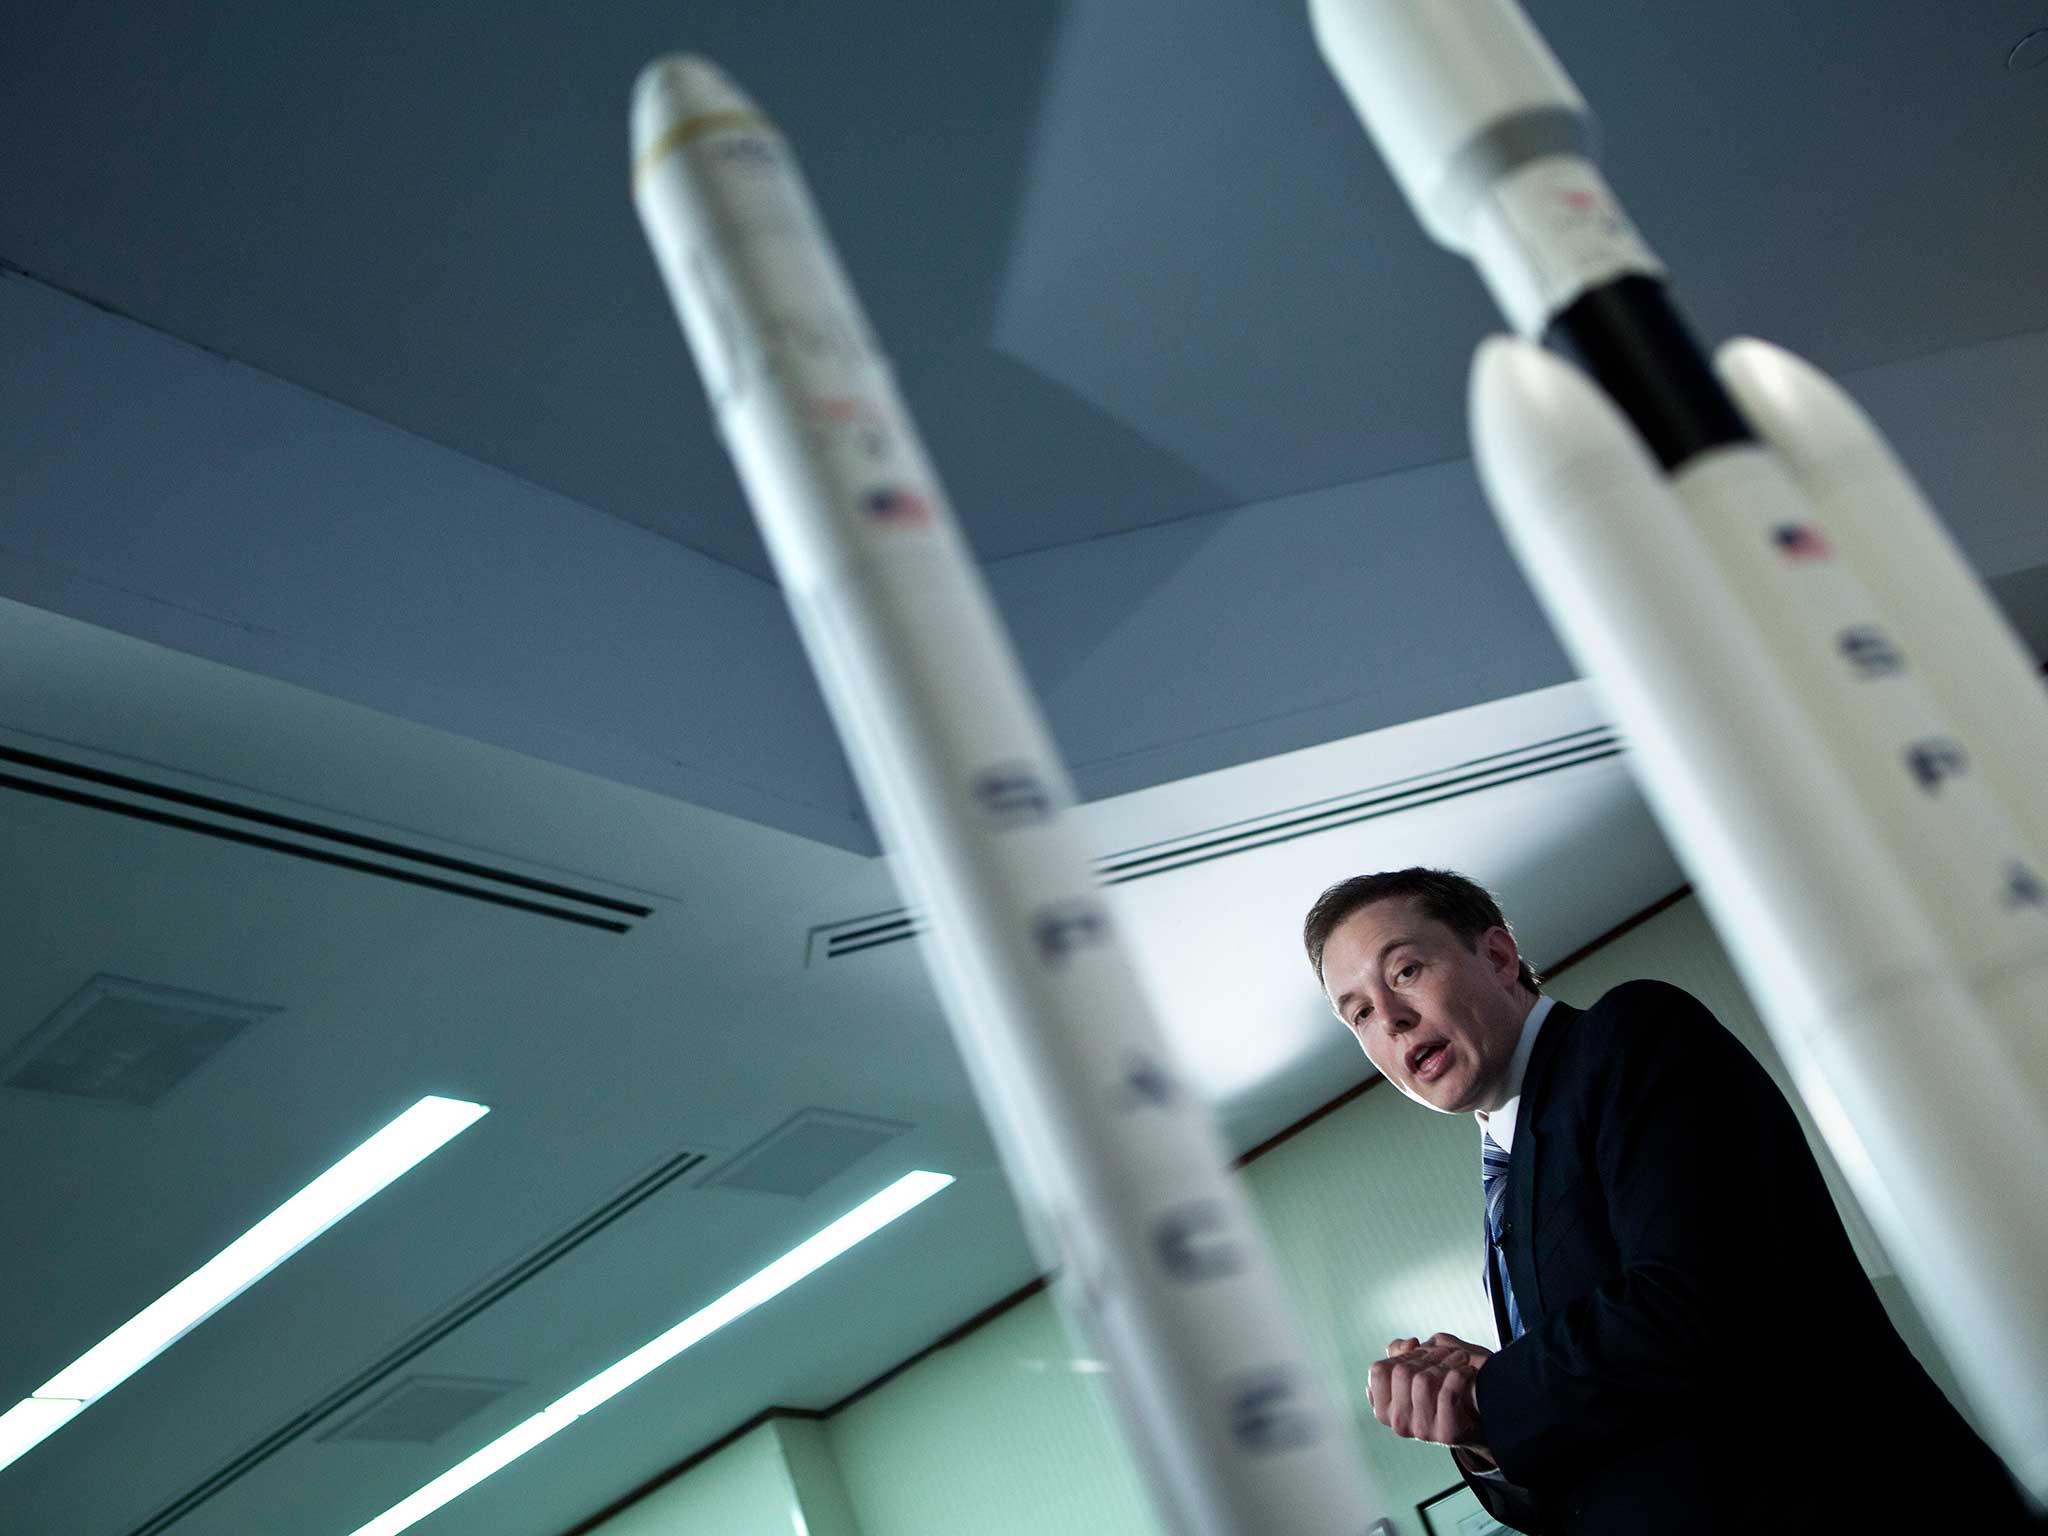 Elon Musk at a press conference for SpaceX last year